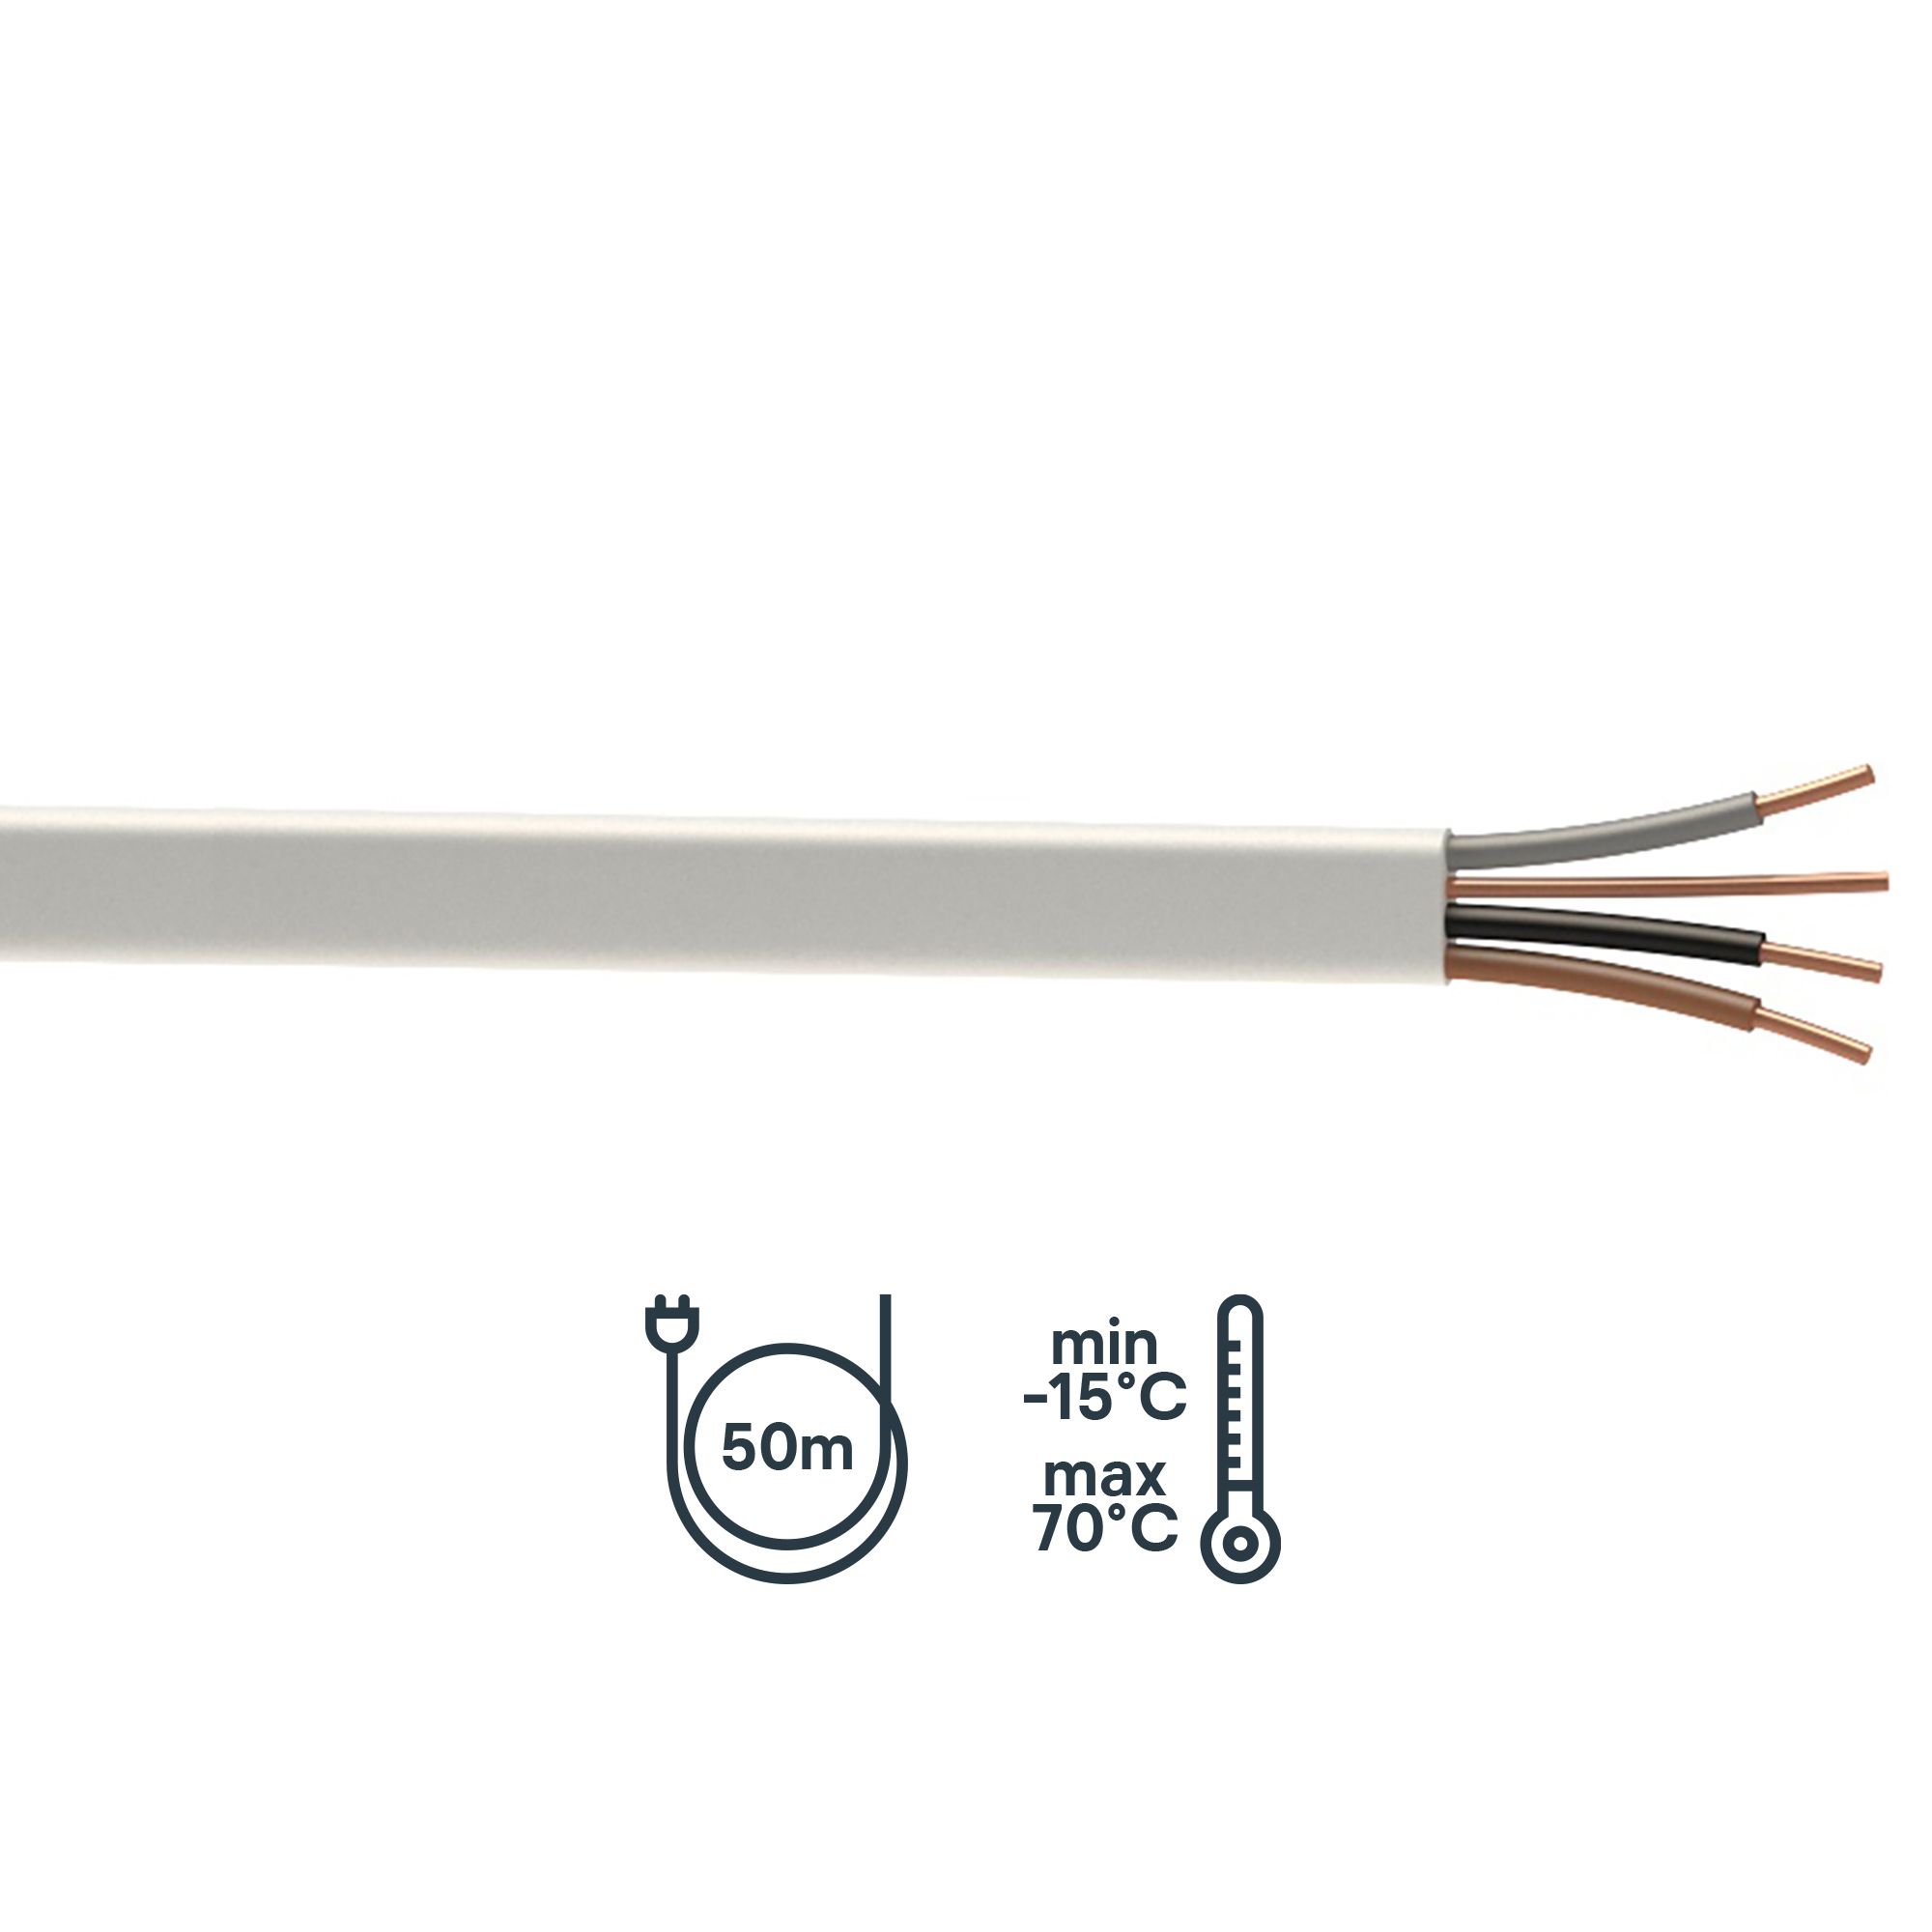 Prysmian Grey 3-core & earth Cable 1.5mm² x 50m